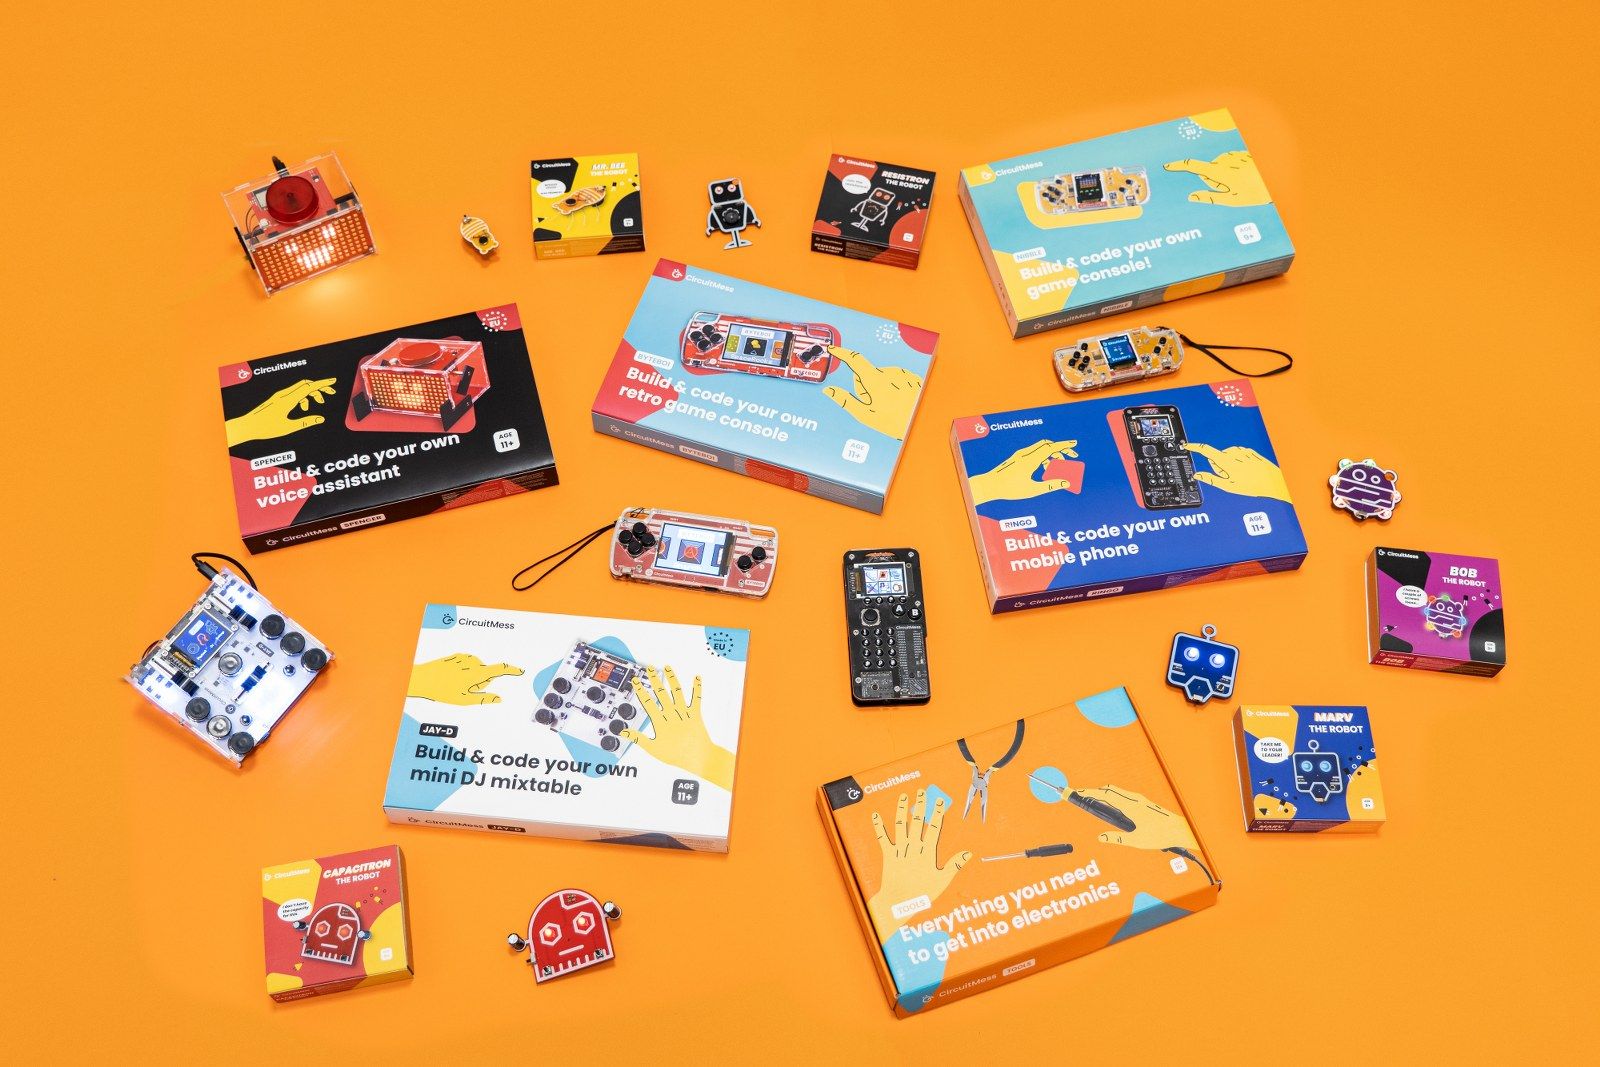 This Small Edtech Startup Creates DIY STEM kits That Will Teach You the Skills of the Future